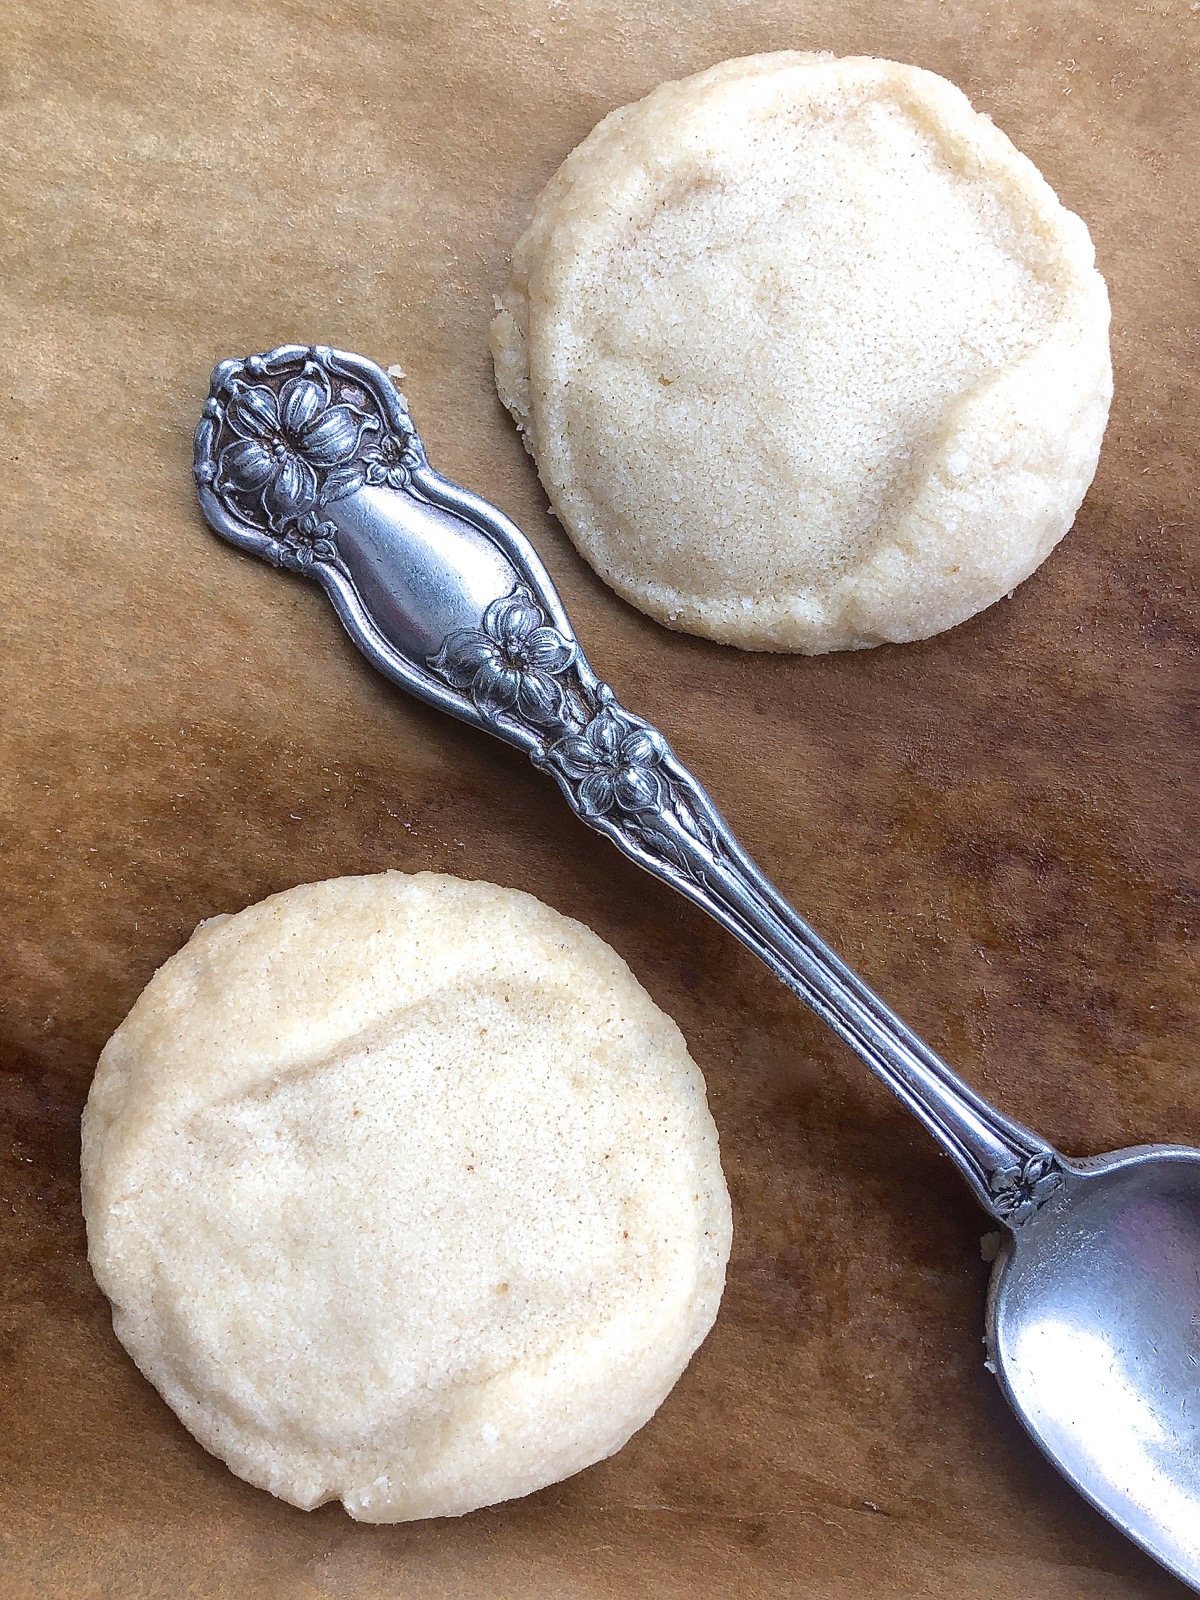 Two baked shortbread cookies with only a vague imprint, shown with the scrolled spoon handle that made the imprint.